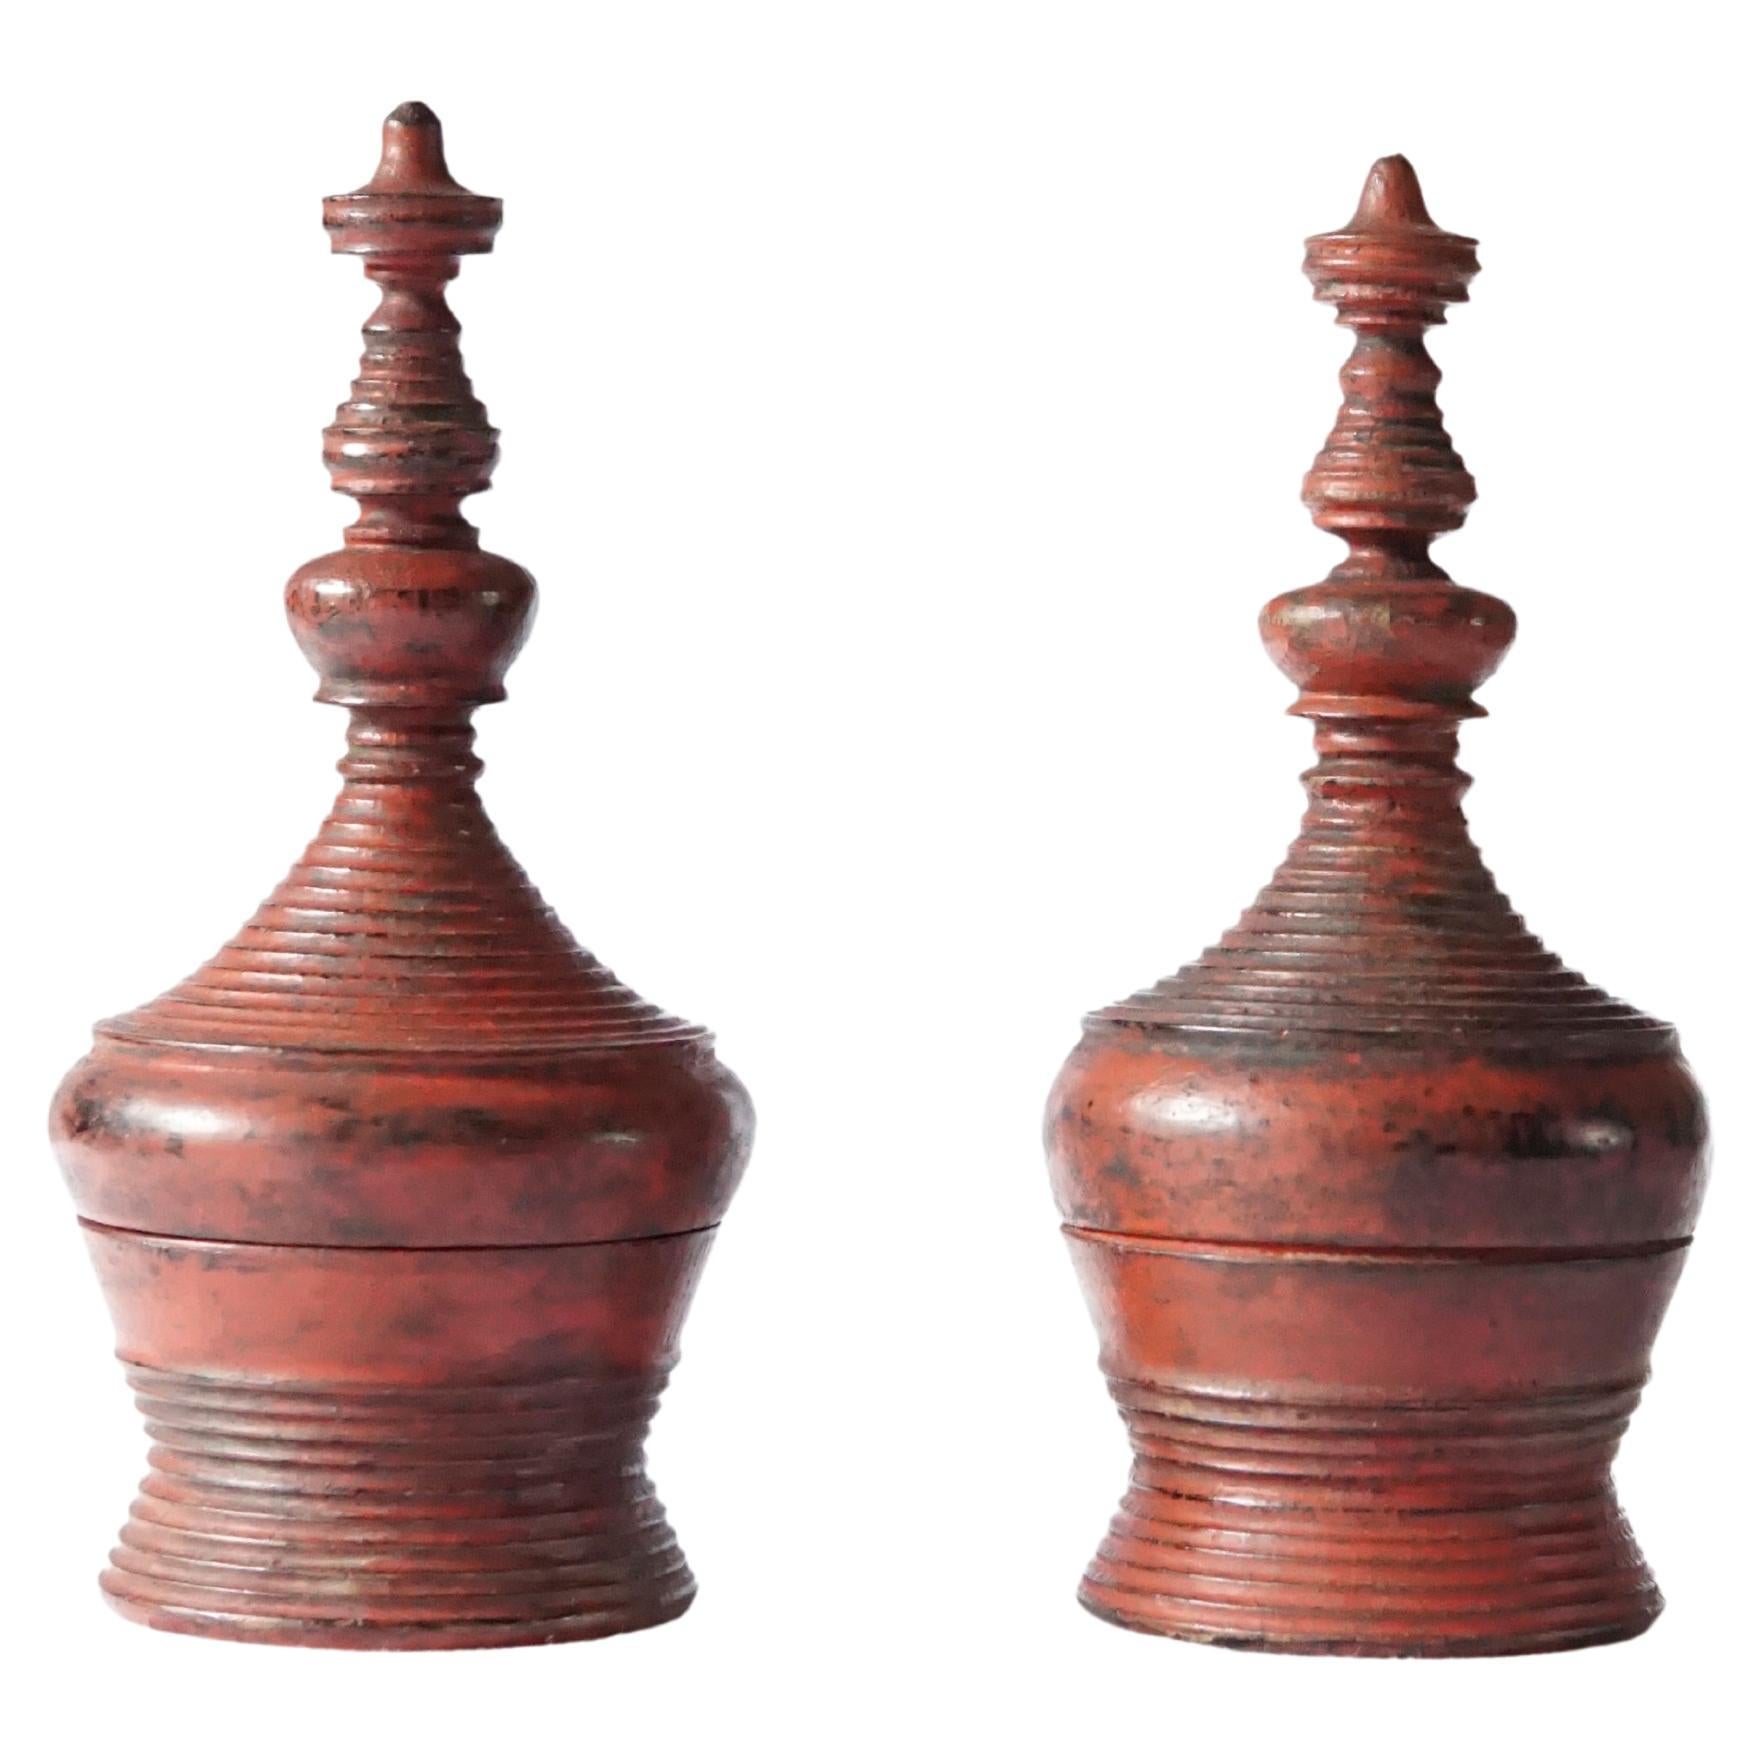 Pair of Small Burmese Red& Black Lacquer Offering Vessels, "Hsun Ok", c. 1900